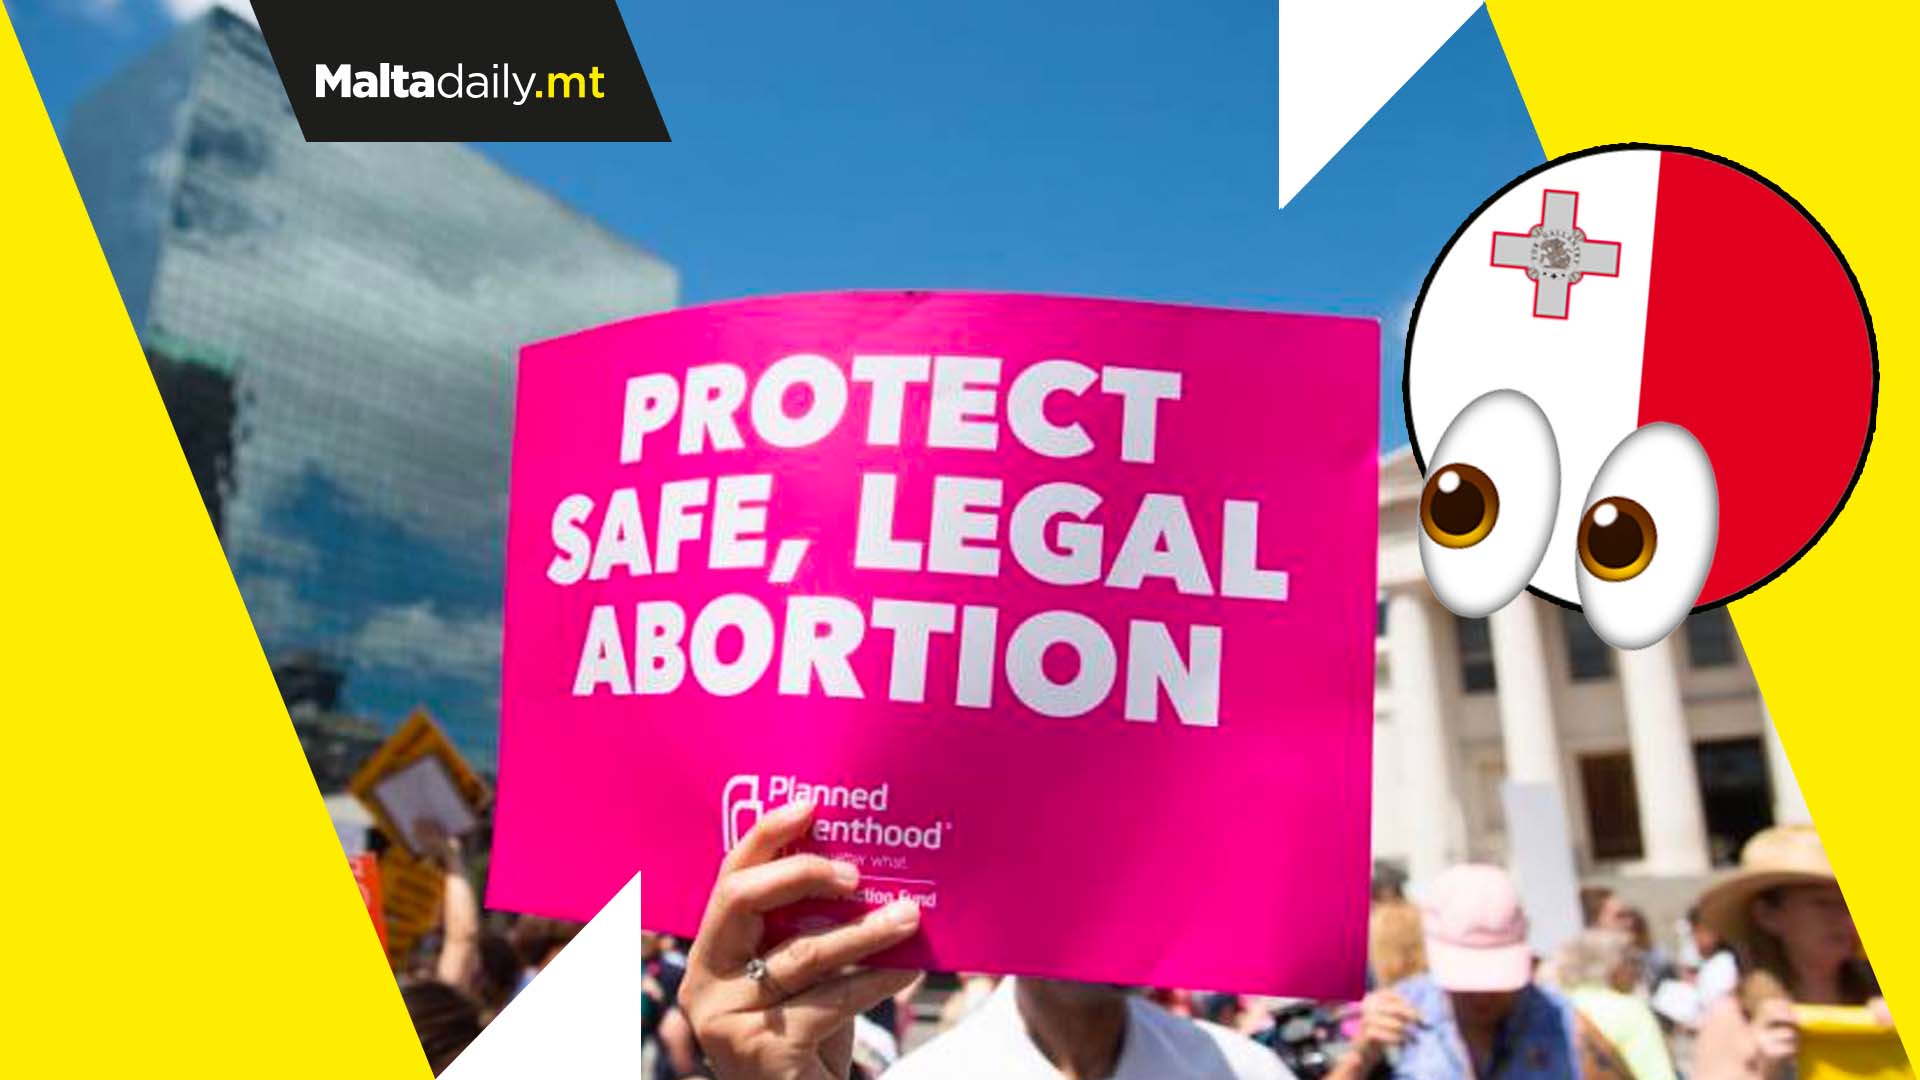 Malta in spotlight as MEPS demand right to safe and legal abortion